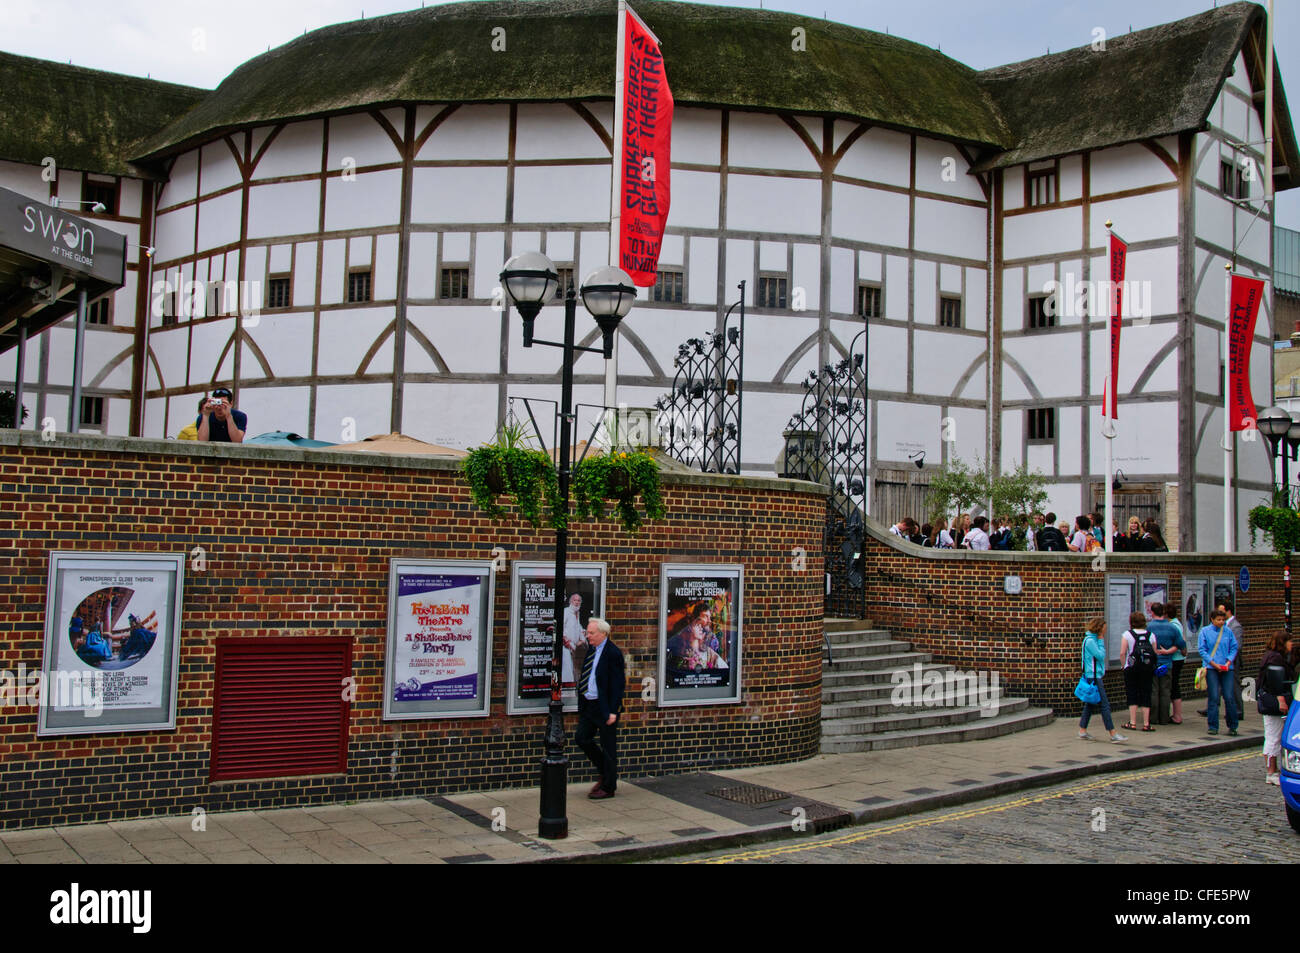 A modern reconstruction of the Globe, named 'Shakespeare's Globe', opened in 1997 approximately 750 ft from the old site,London Stock Photo